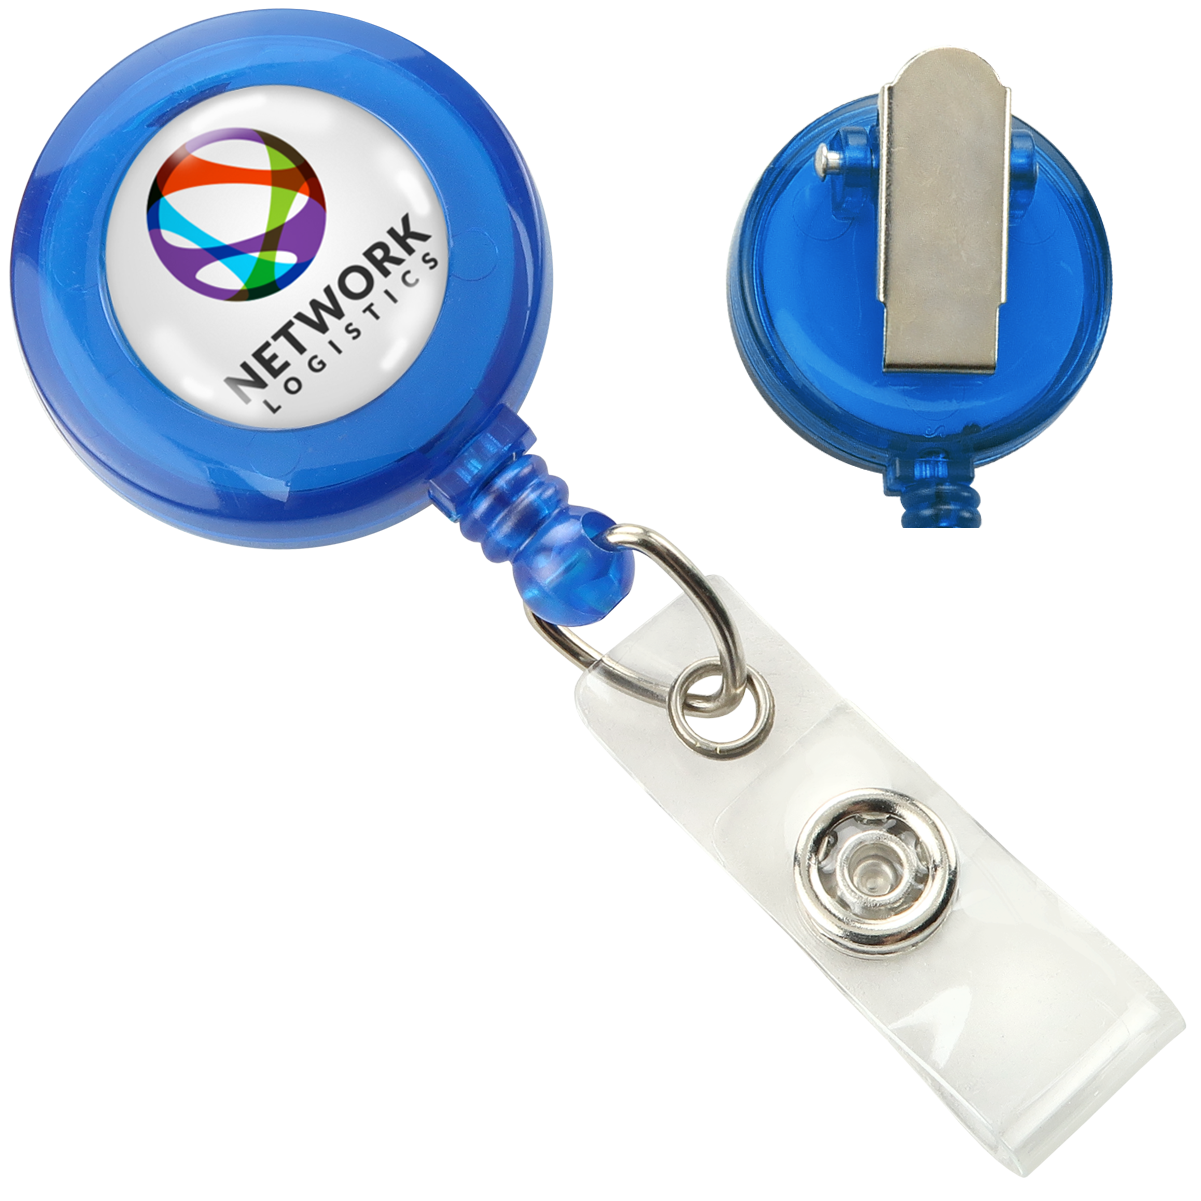 Custom badge reel with non swivel spring clip in translucent blue color